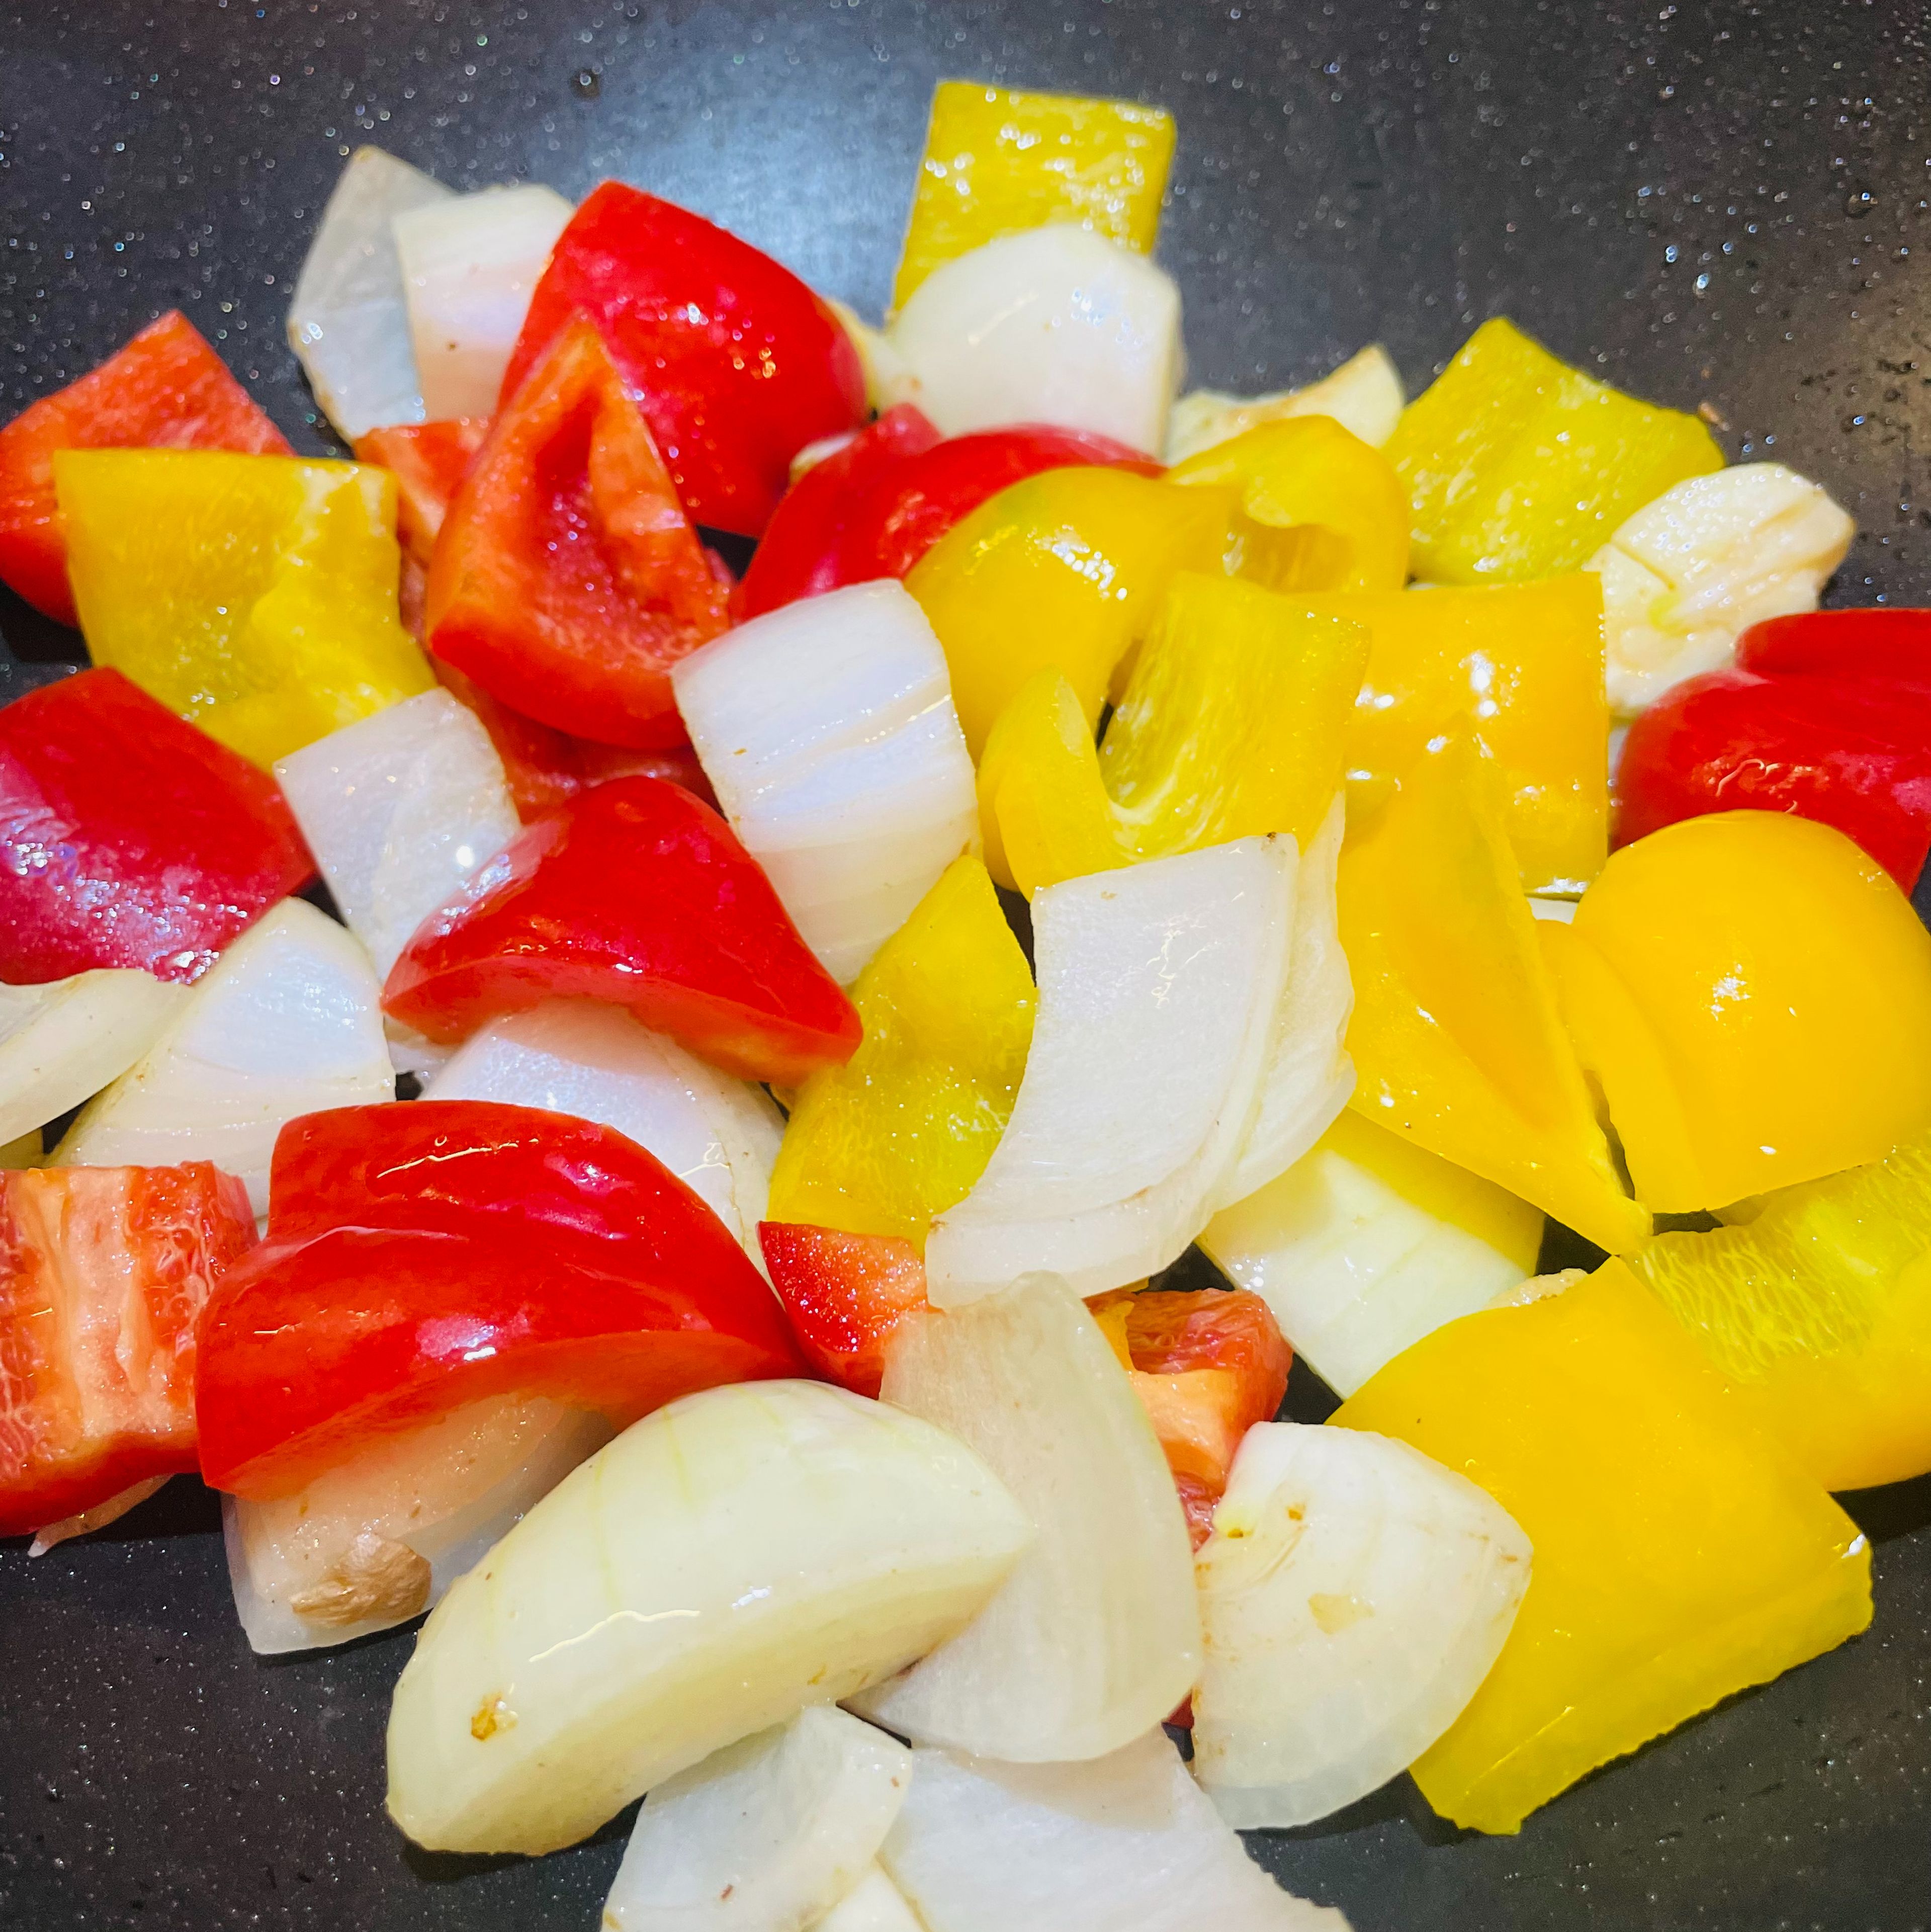 Sauté onion, garlic, bell peppers for about 2 minutes